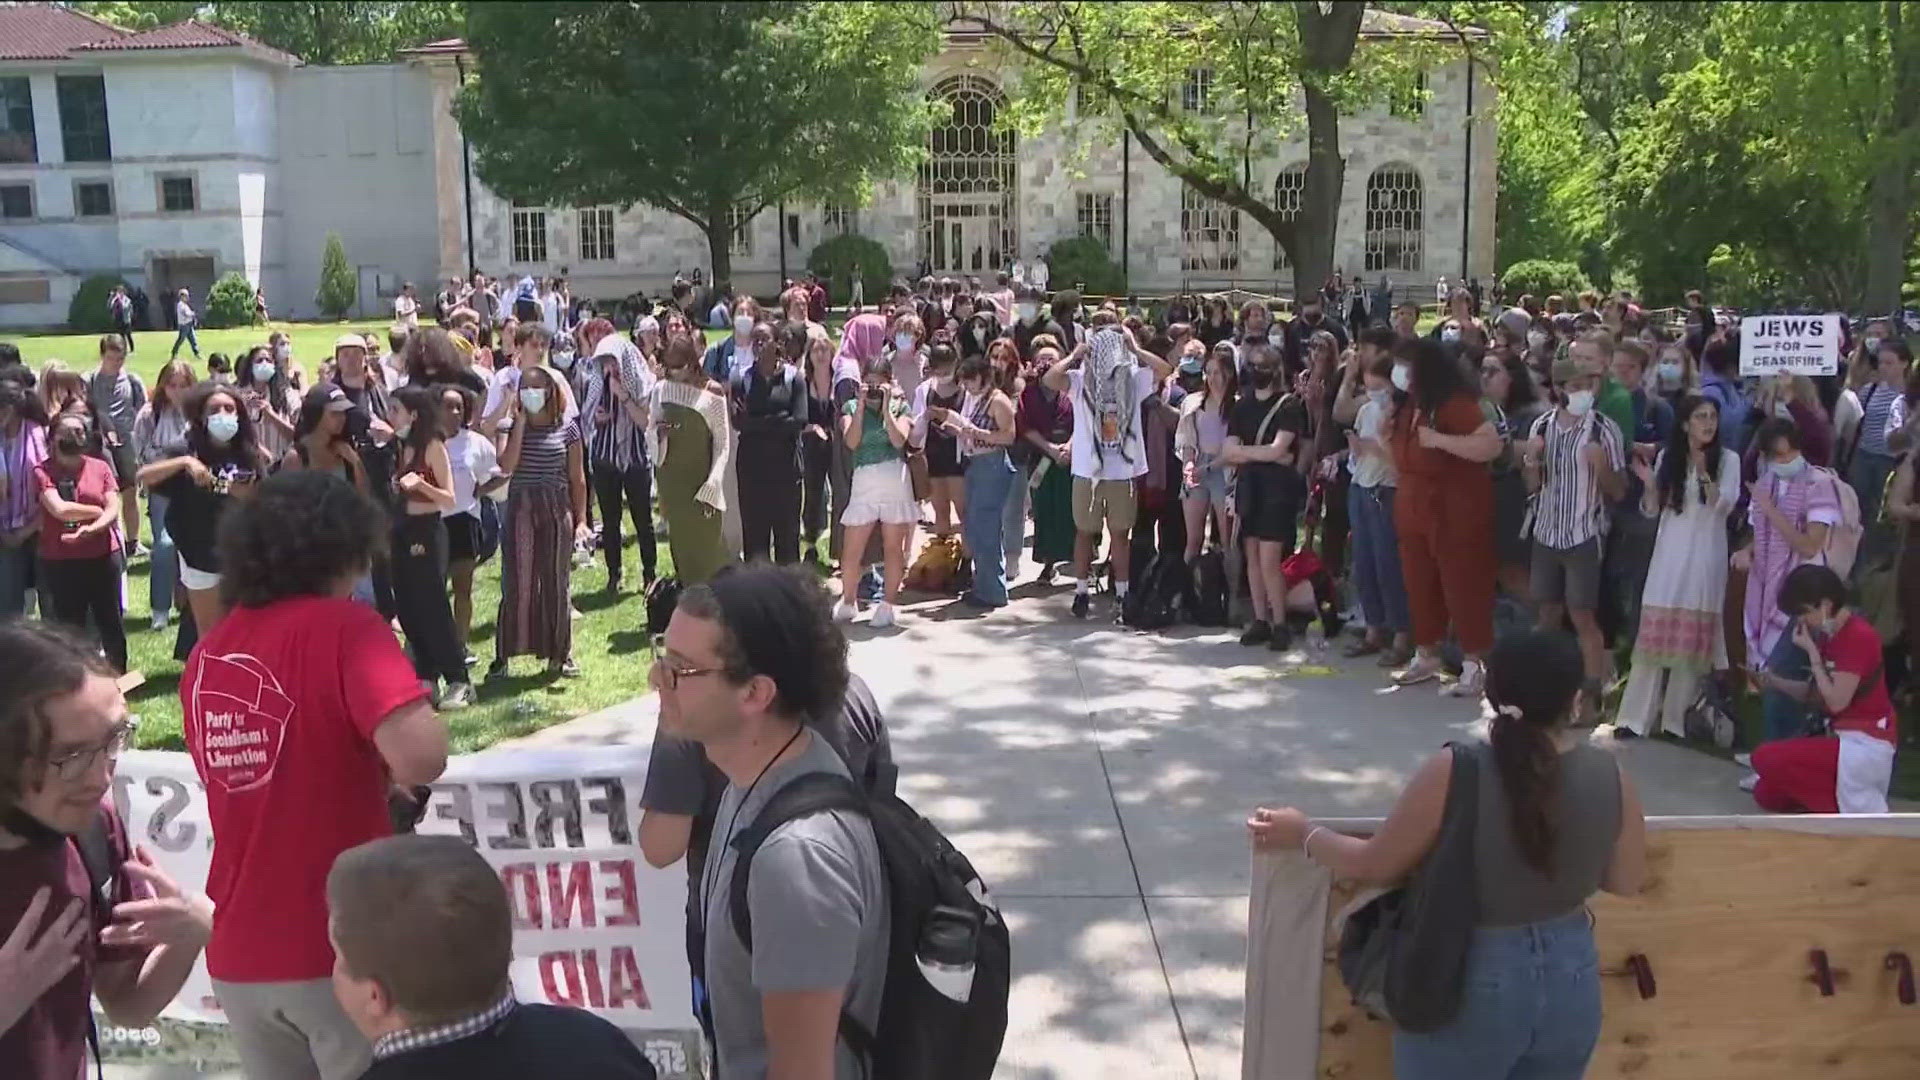 The protest encampment follows on a number of similar protest actions that have spread to campuses nationwide.